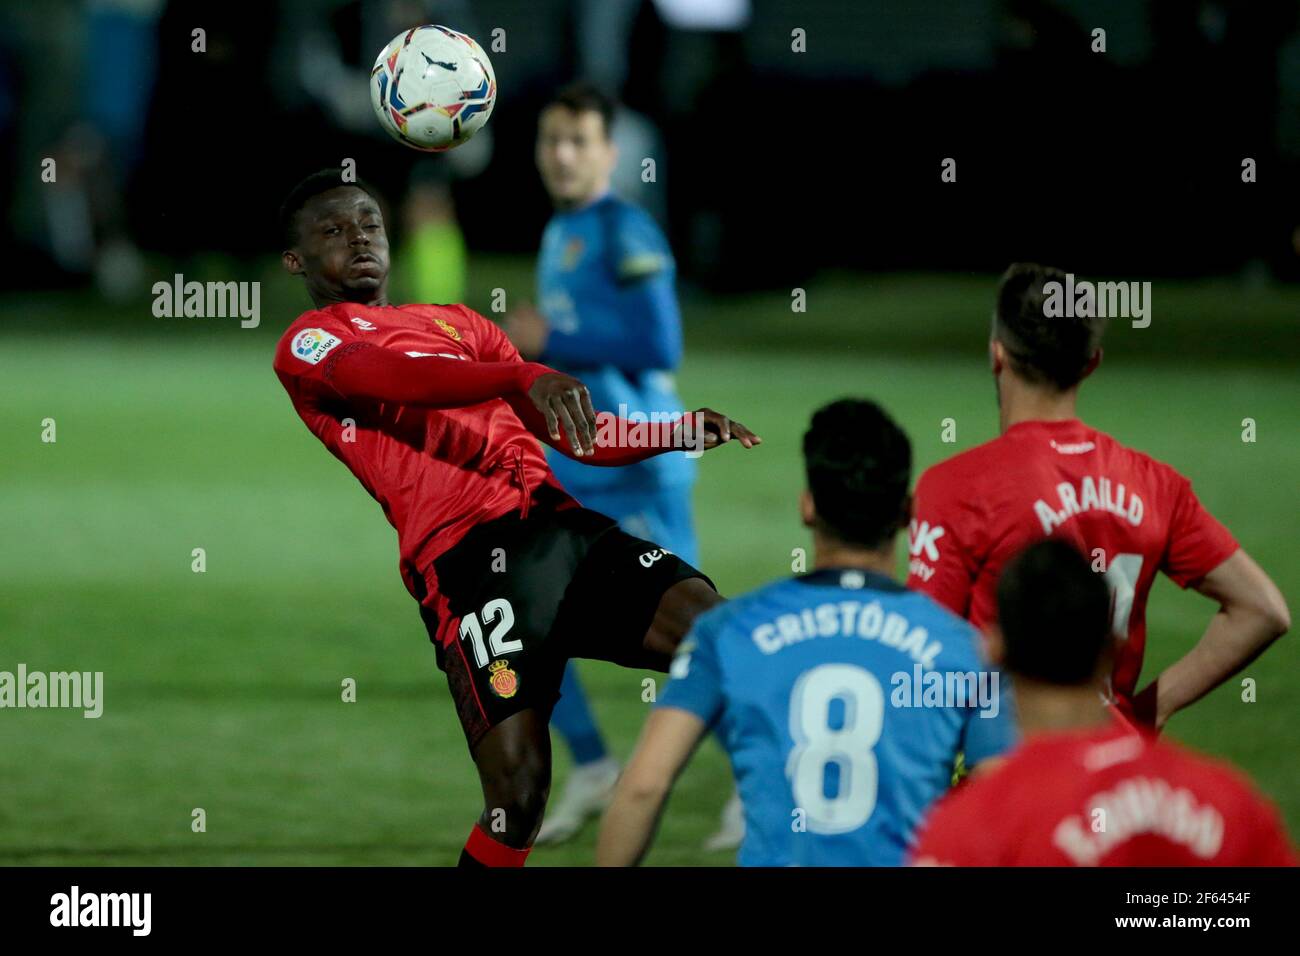 Fuenlabrada, Madrid, Spain, 29.03.2021C. F. Fuenlabrada against R. C. D. Mallorca match of the second division of Spanish soccer in match 31. Mallorca player Baba heads off Final score 4-1 winner Fuenlabrada with goals from the players Oscar Pichi 13 y 38  Nteka 41  and Pathe Ciss 73  Mallorca scores his player Mboula 56  Photo: Juan Carlos Rojas/Picture Alliance | usage worldwide Stock Photo